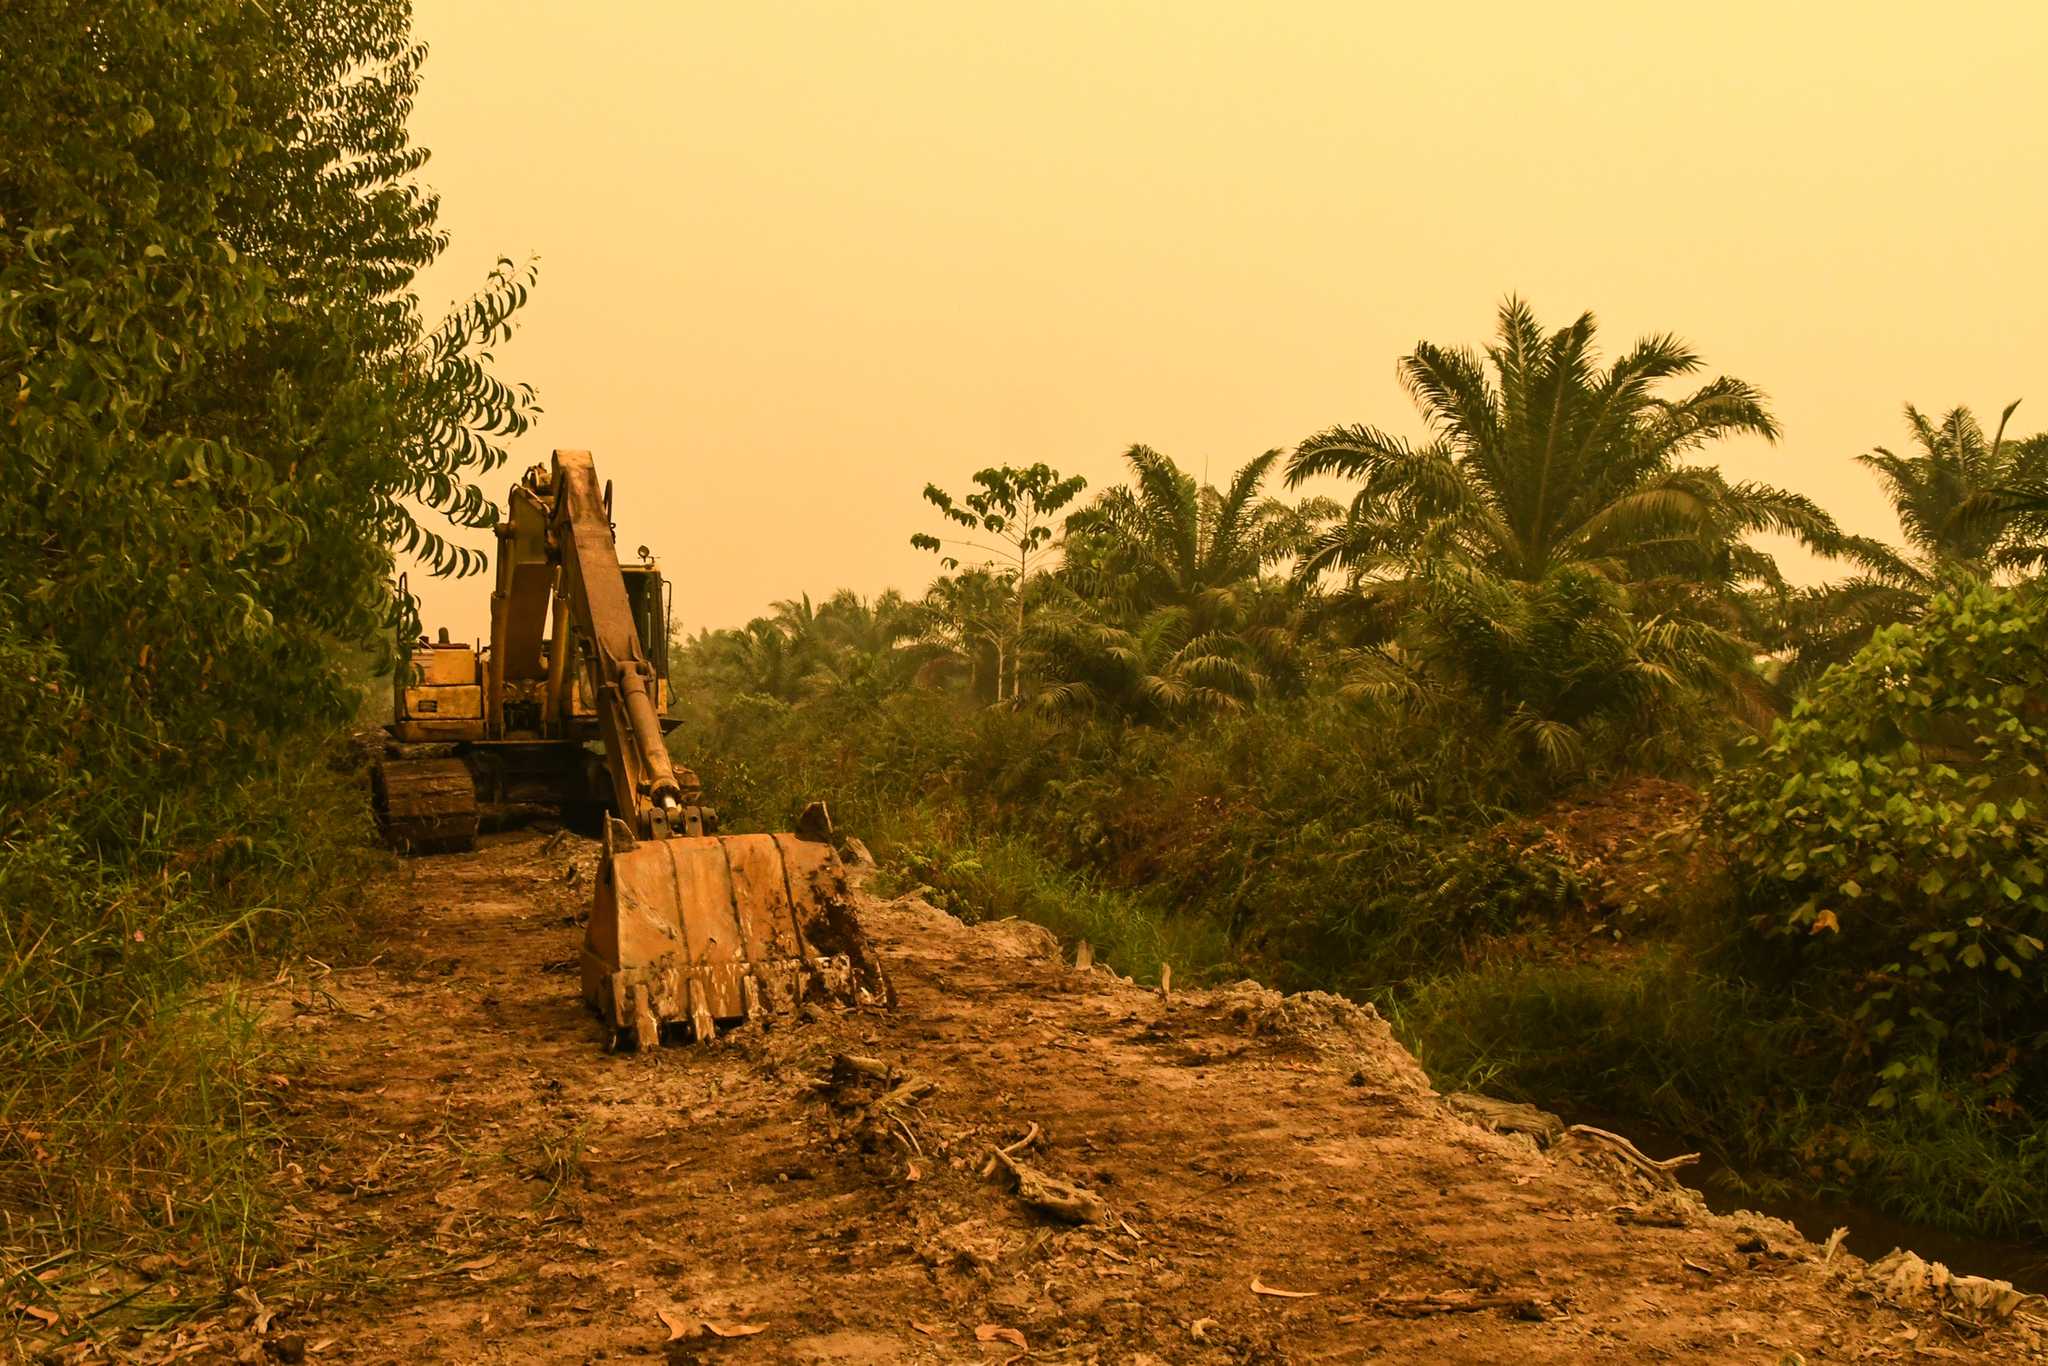 An excavator operates in peatland covered by haze from fires in 2019 in East Tanjung Jabung, Jambi province. 